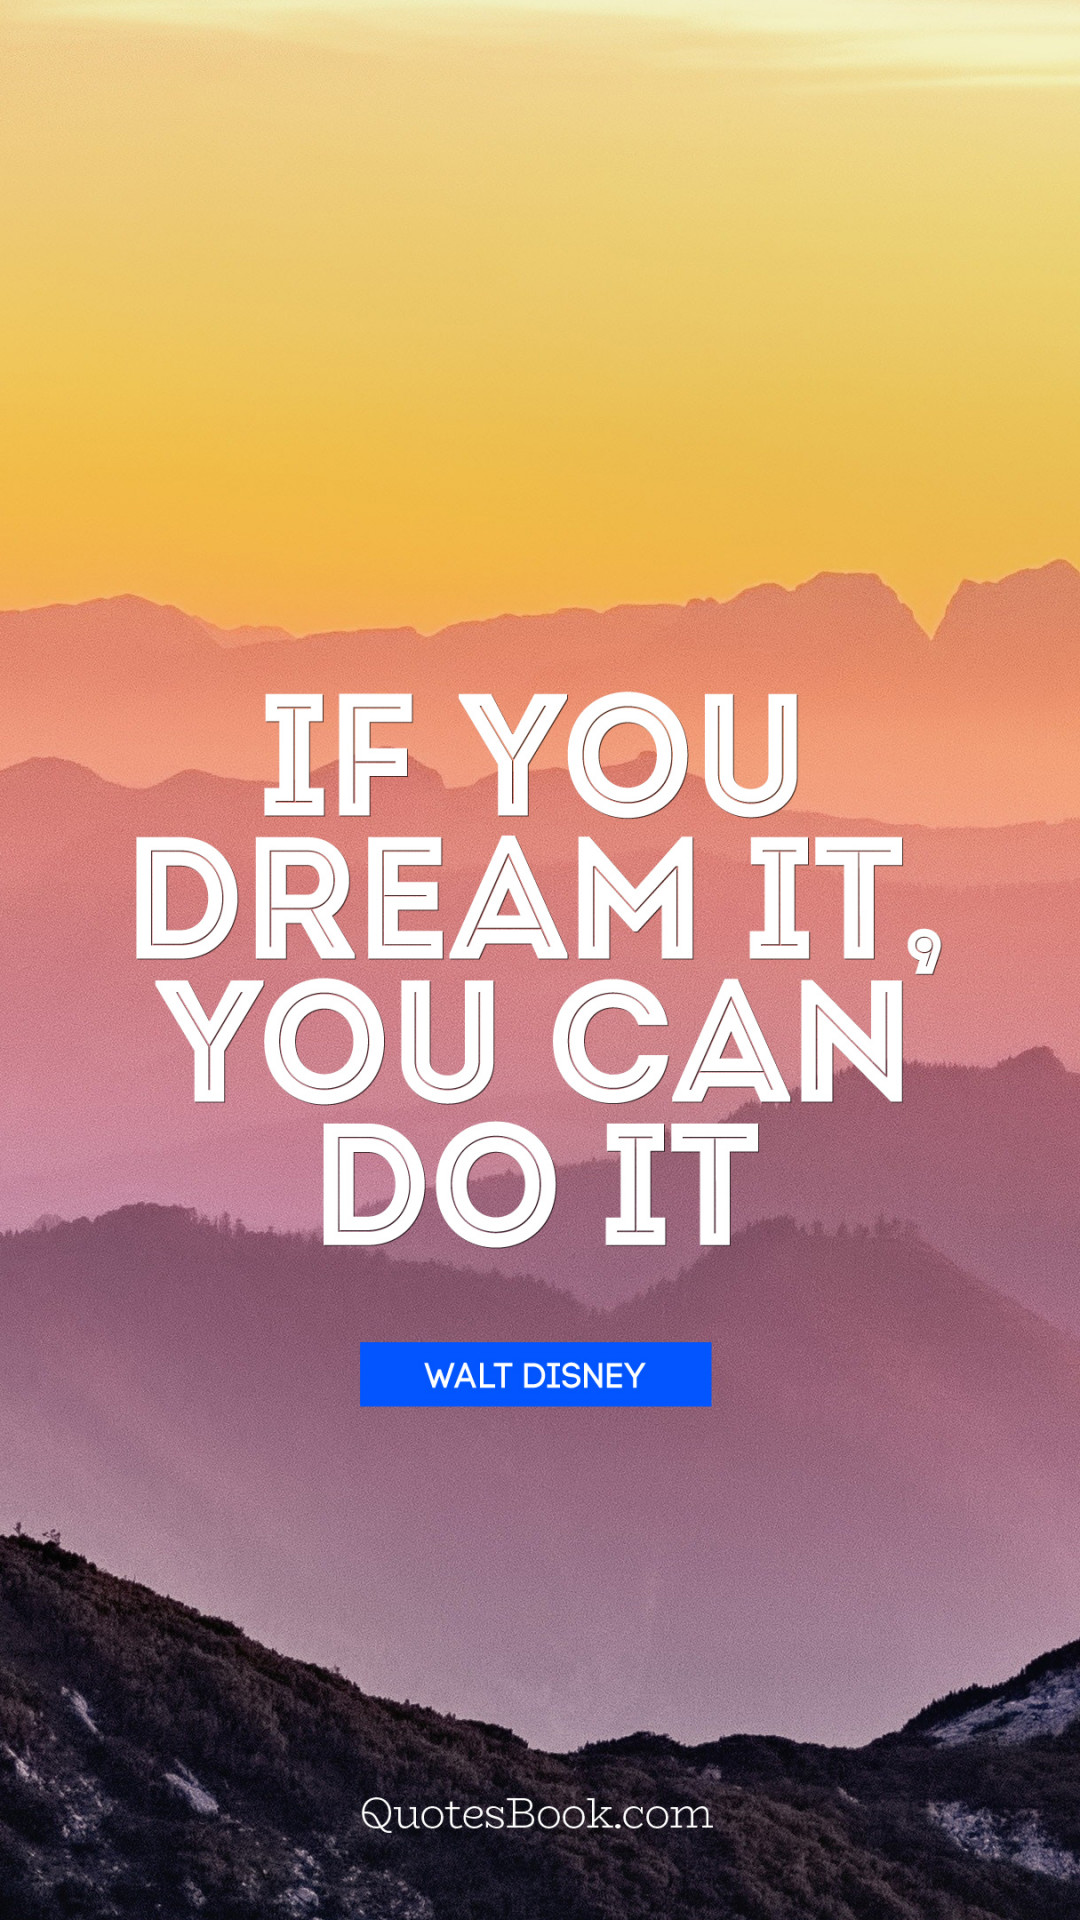 If you dream it, you can do it. Quote by Walt Disney